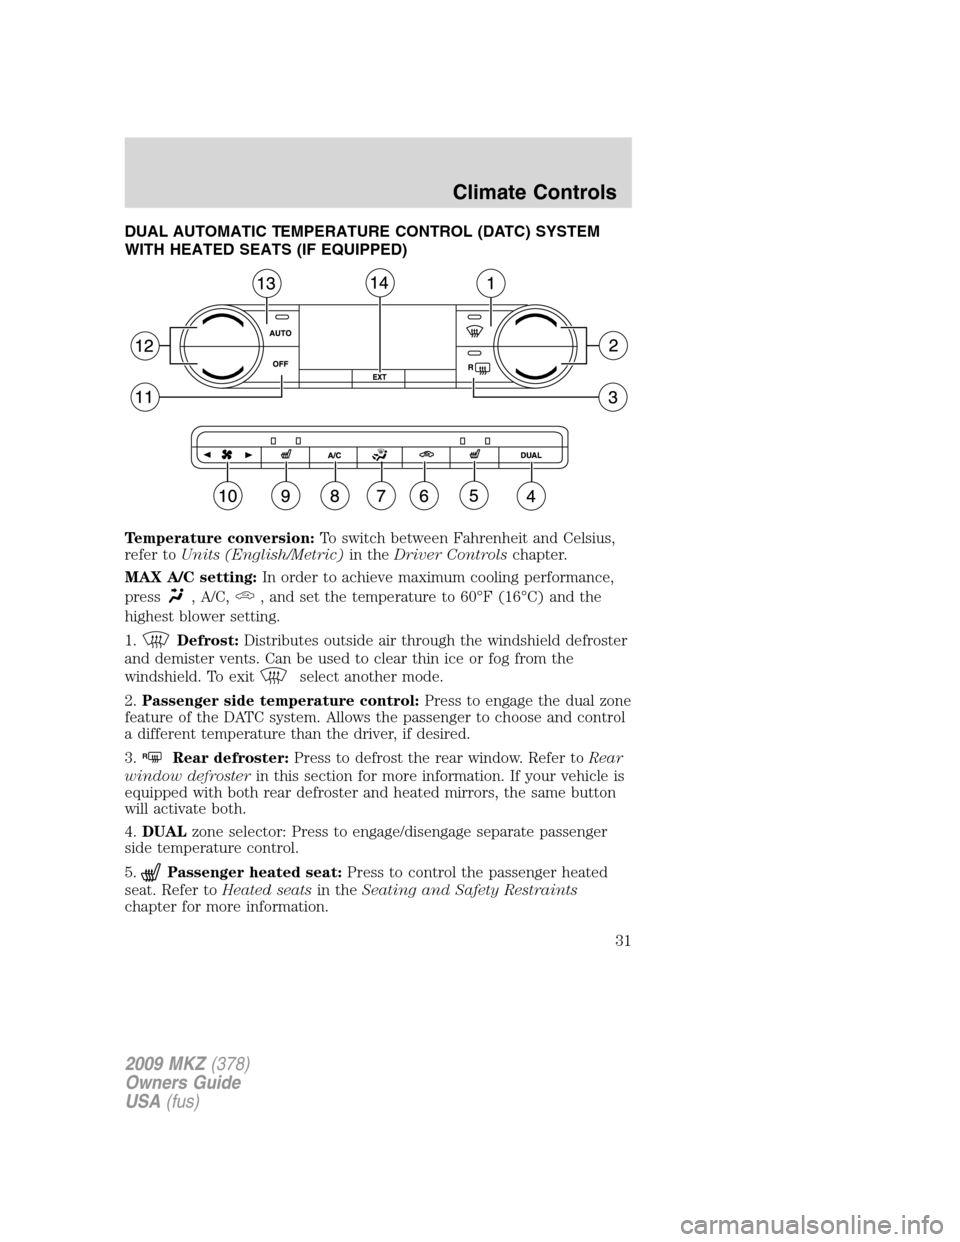 LINCOLN MKZ 2009 User Guide DUAL AUTOMATIC TEMPERATURE CONTROL (DATC) SYSTEM
WITH HEATED SEATS (IF EQUIPPED)
Temperature conversion:To switch between Fahrenheit and Celsius,
refer toUnits (English/Metric)in theDriver Controlscha